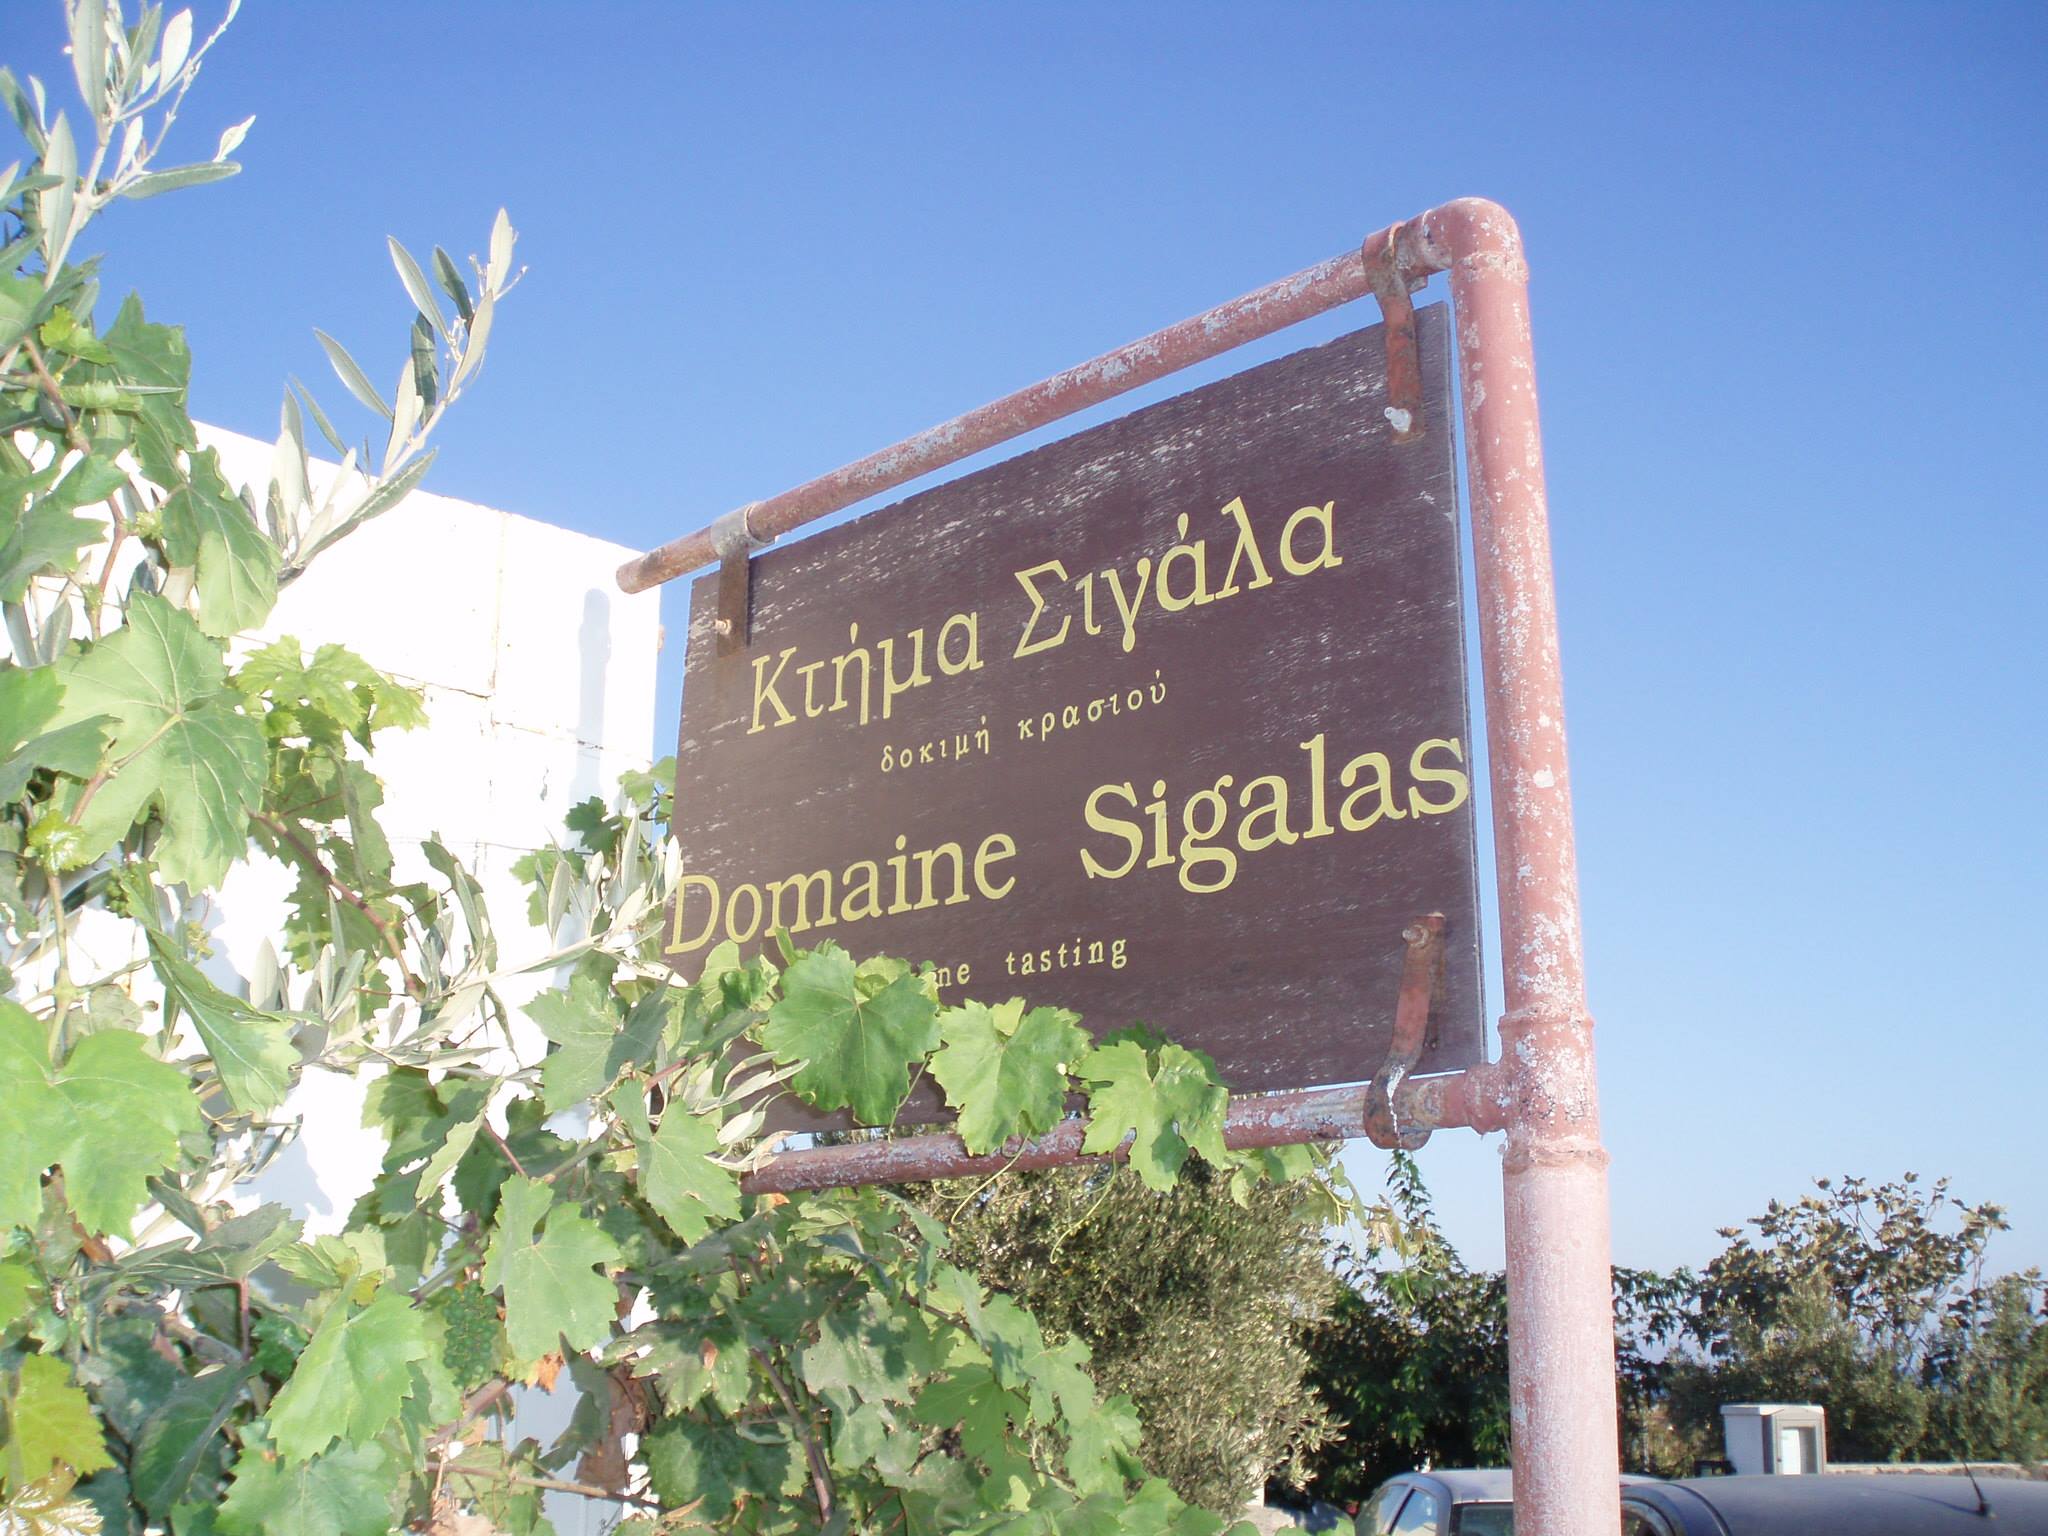 Domaine Sigalas sign